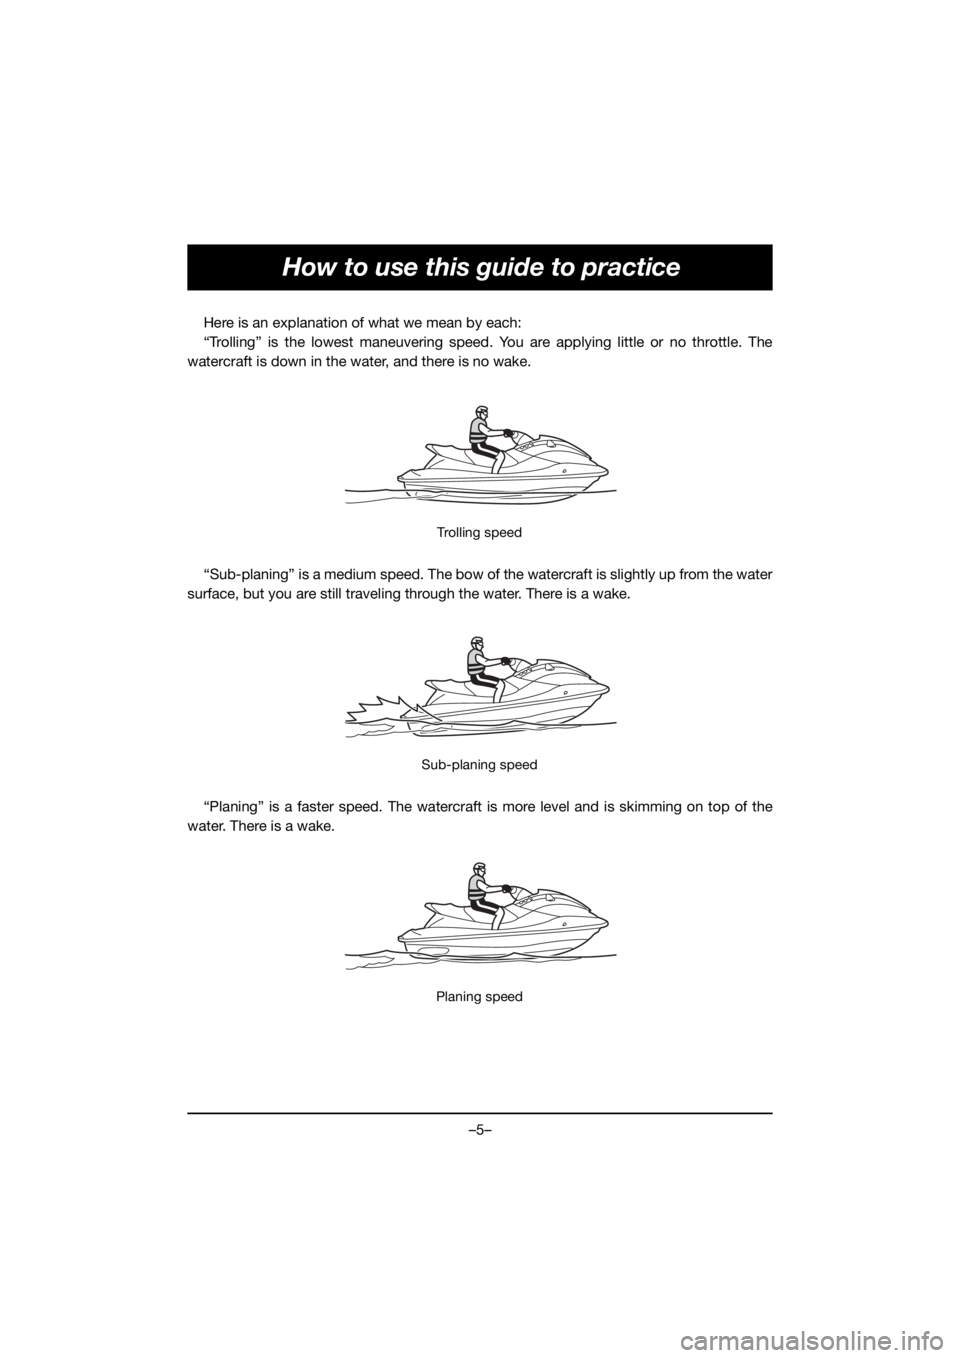 YAMAHA EX 2021  Notices Demploi (in French) –5–
How to use this guide to practice
Here is an explanation of what we mean by each:
“Trolling” is the lowest maneuvering speed. You are applying little or no throttle. The
watercraft is down